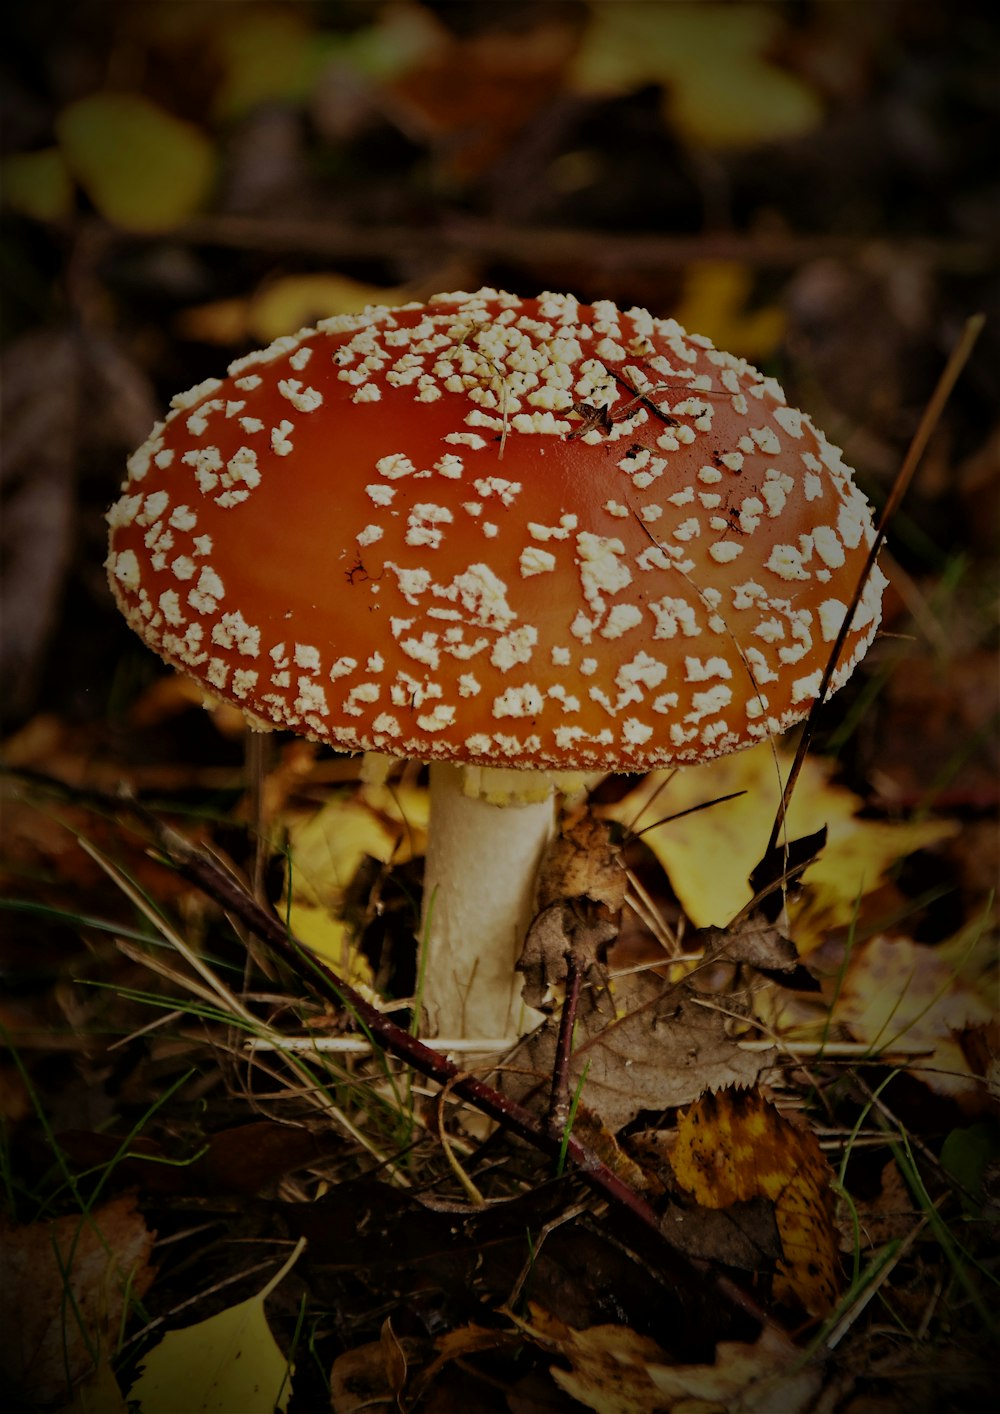 red and white mushroom on brown dried leaves